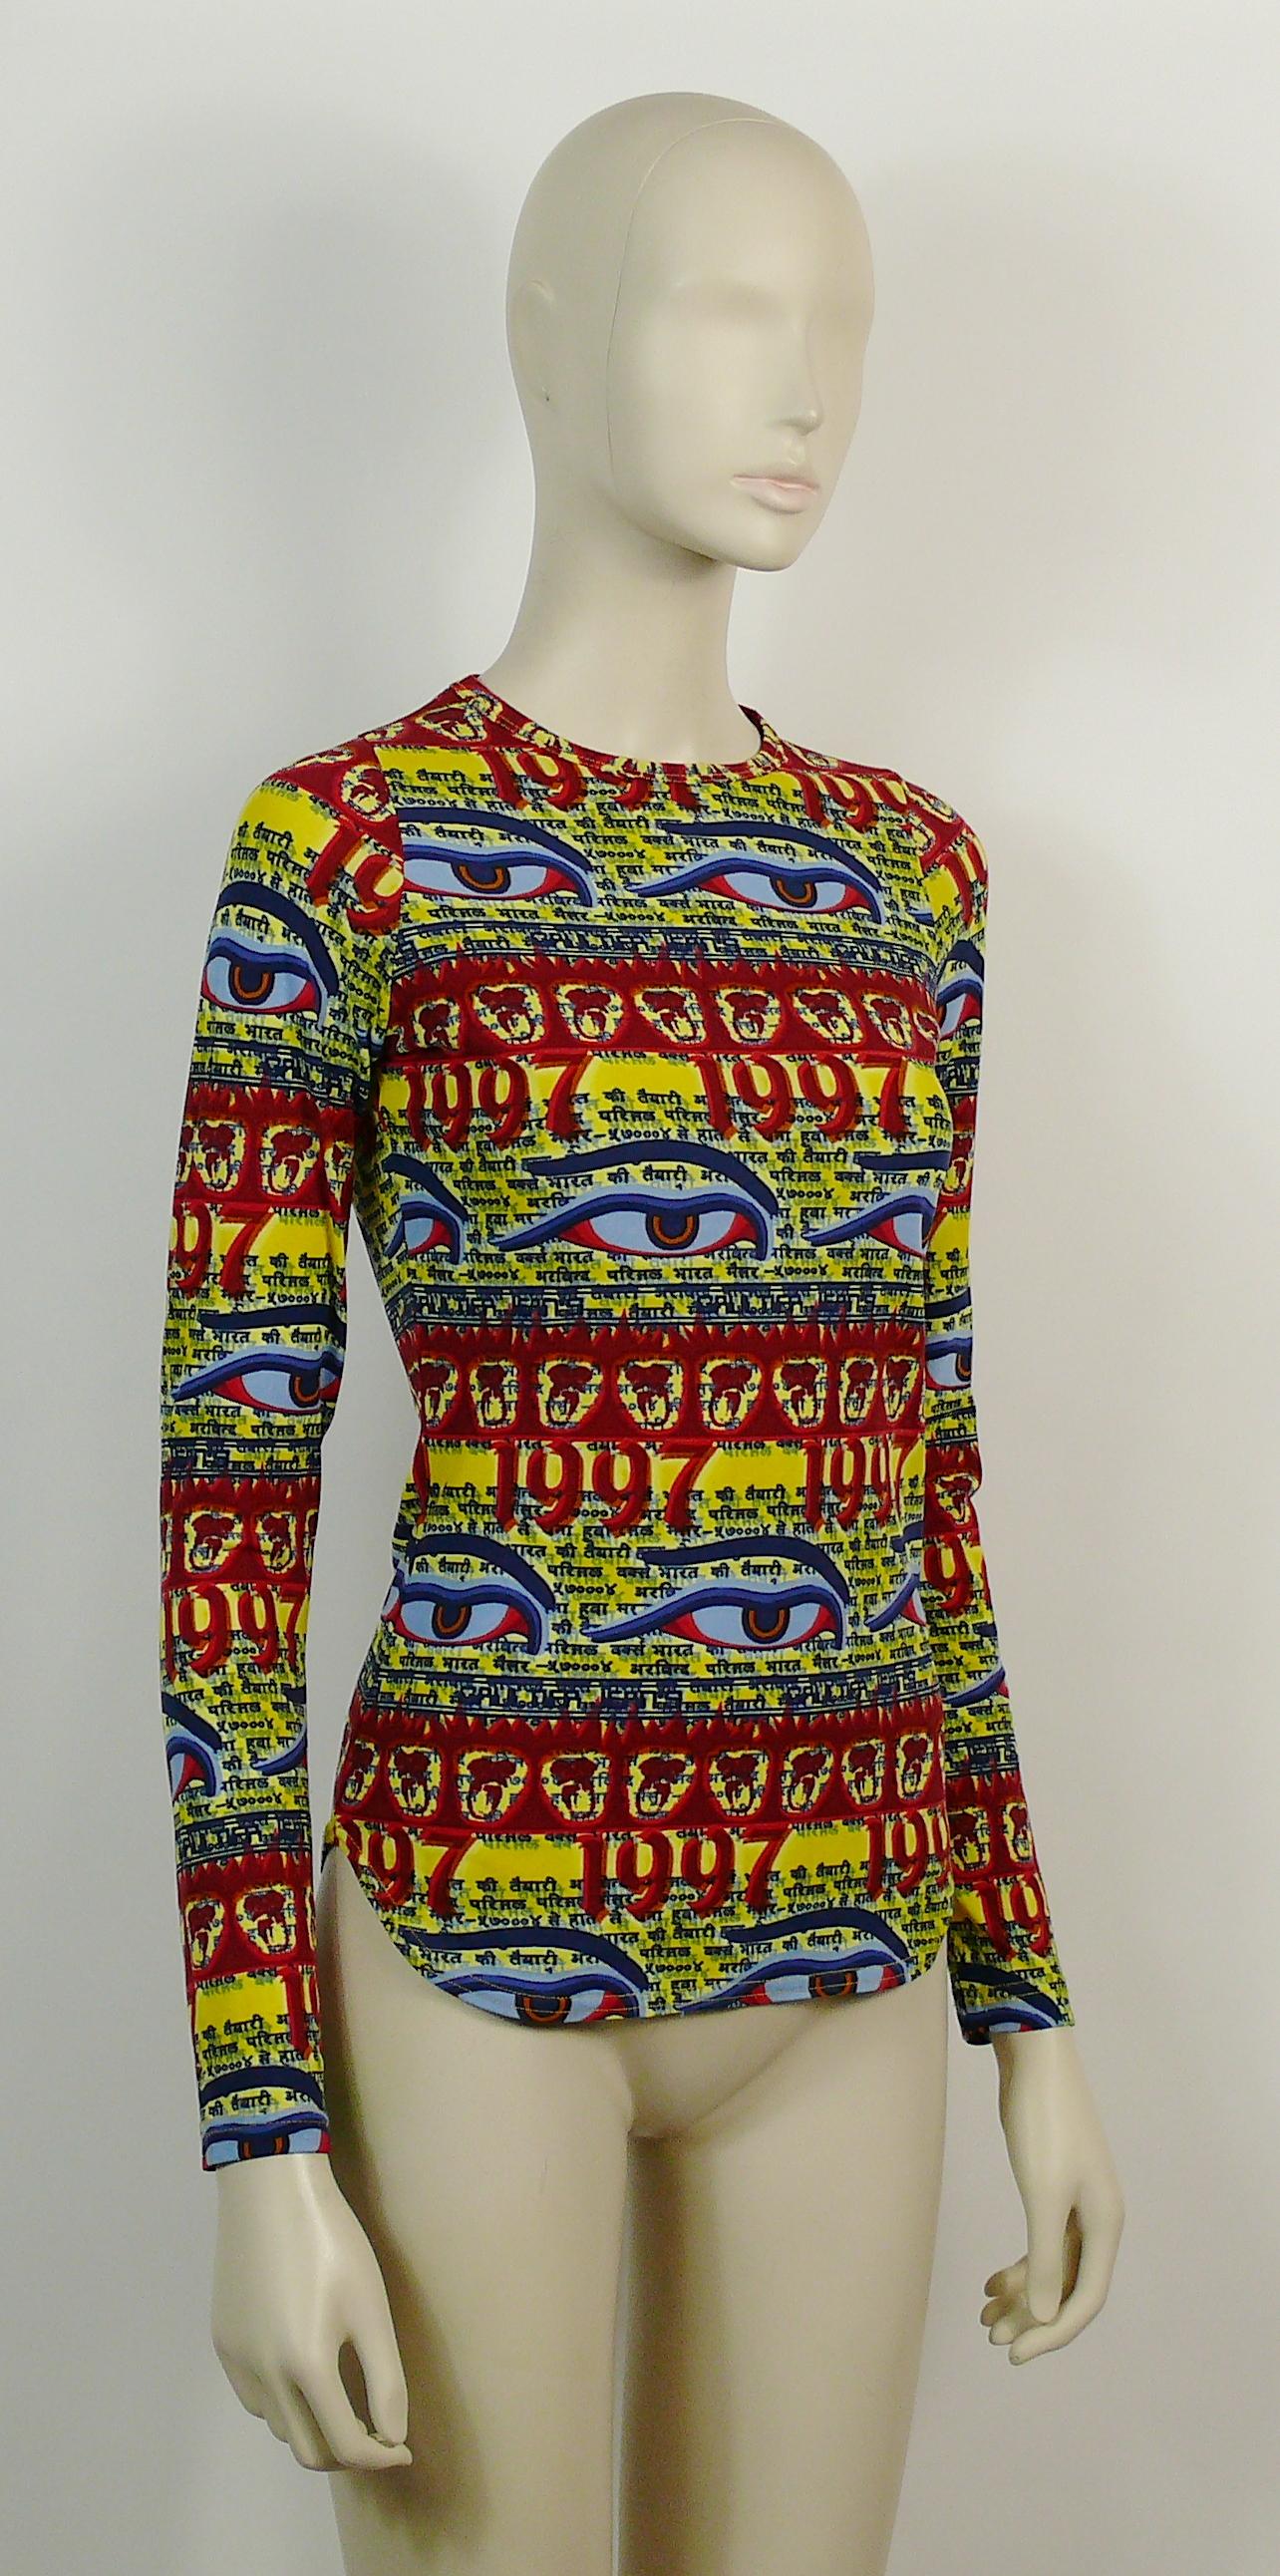 JEAN PAUL GAULTIER vintage 1997 top featuring multicolored Buddha Eyes and Tibetan words print on a yellow background.

Label reads GAULTIER JEAN'S.

Size tag reads : 38.
Please refer to measurements.

Missing composition tag.
Fabric has some